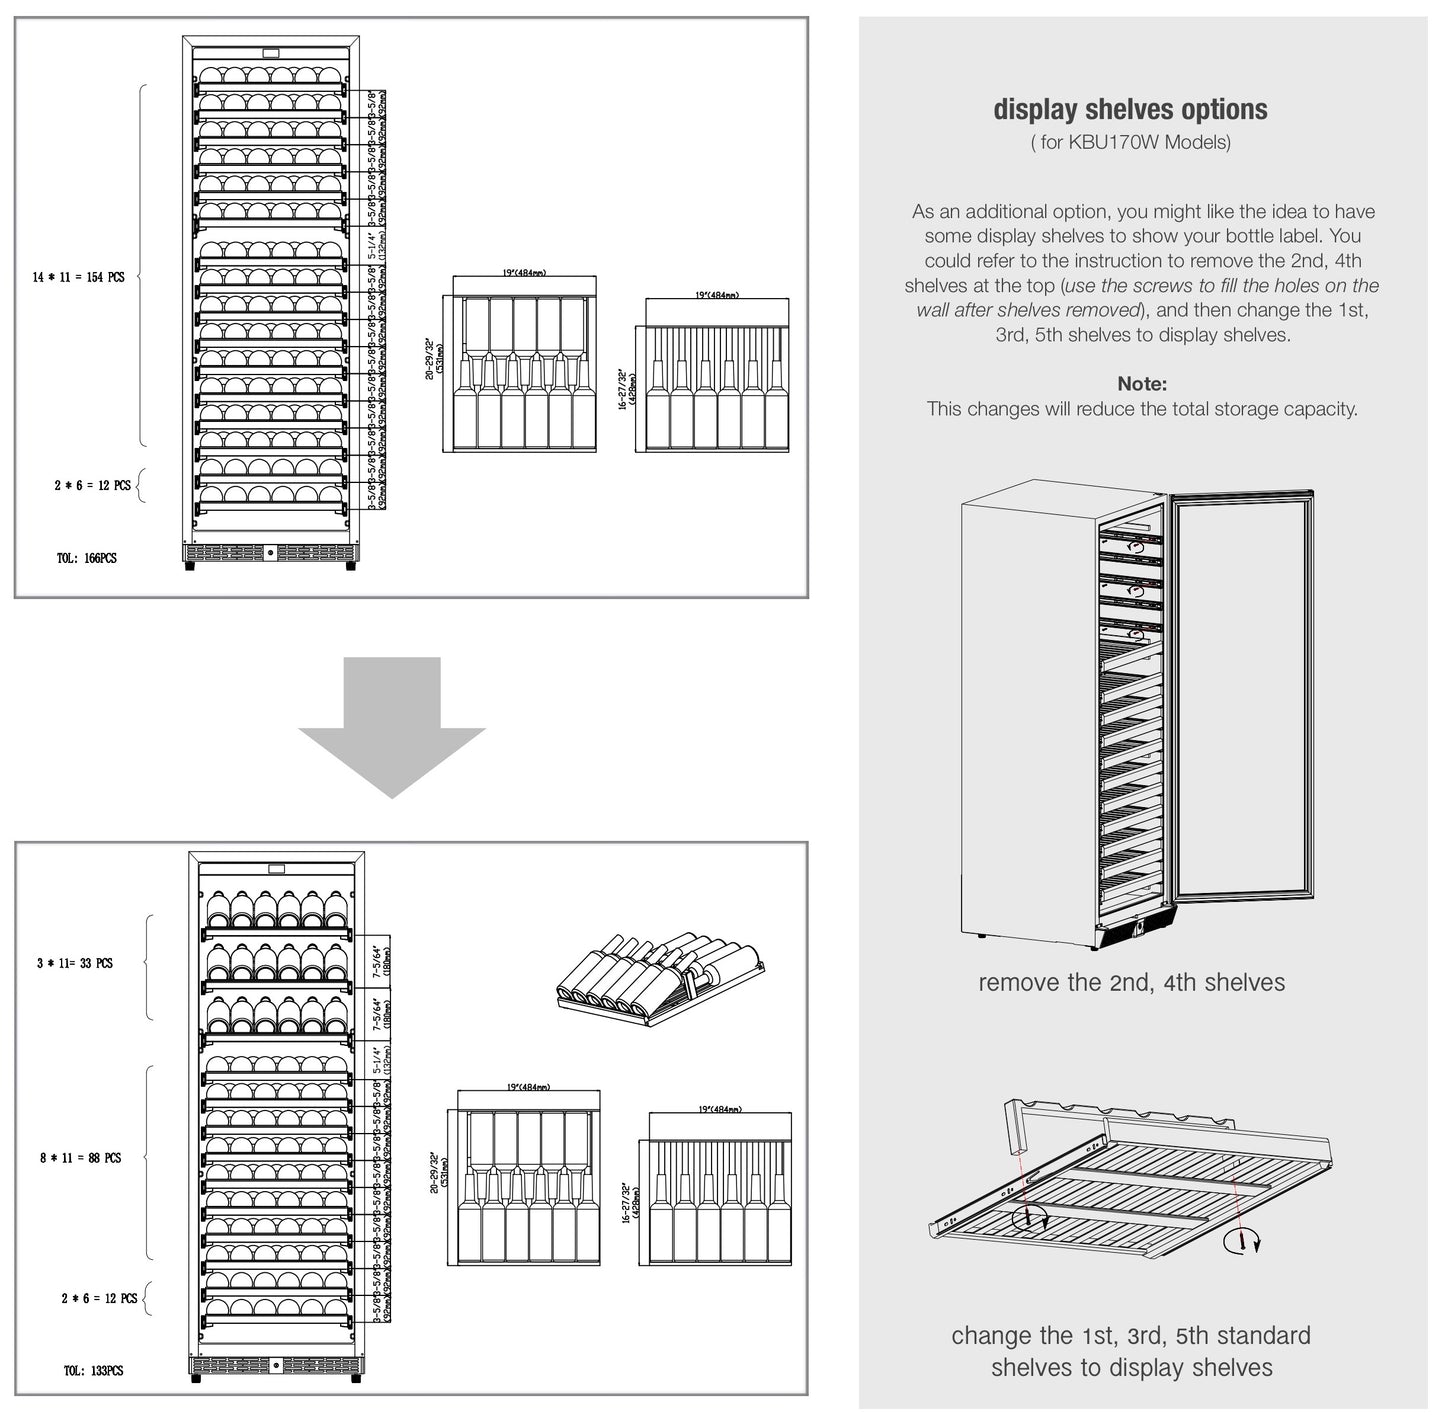 A diagram of a wine rack with several bottles on display shelves in a Kings Bottle tall large wine cooler refrigerator.